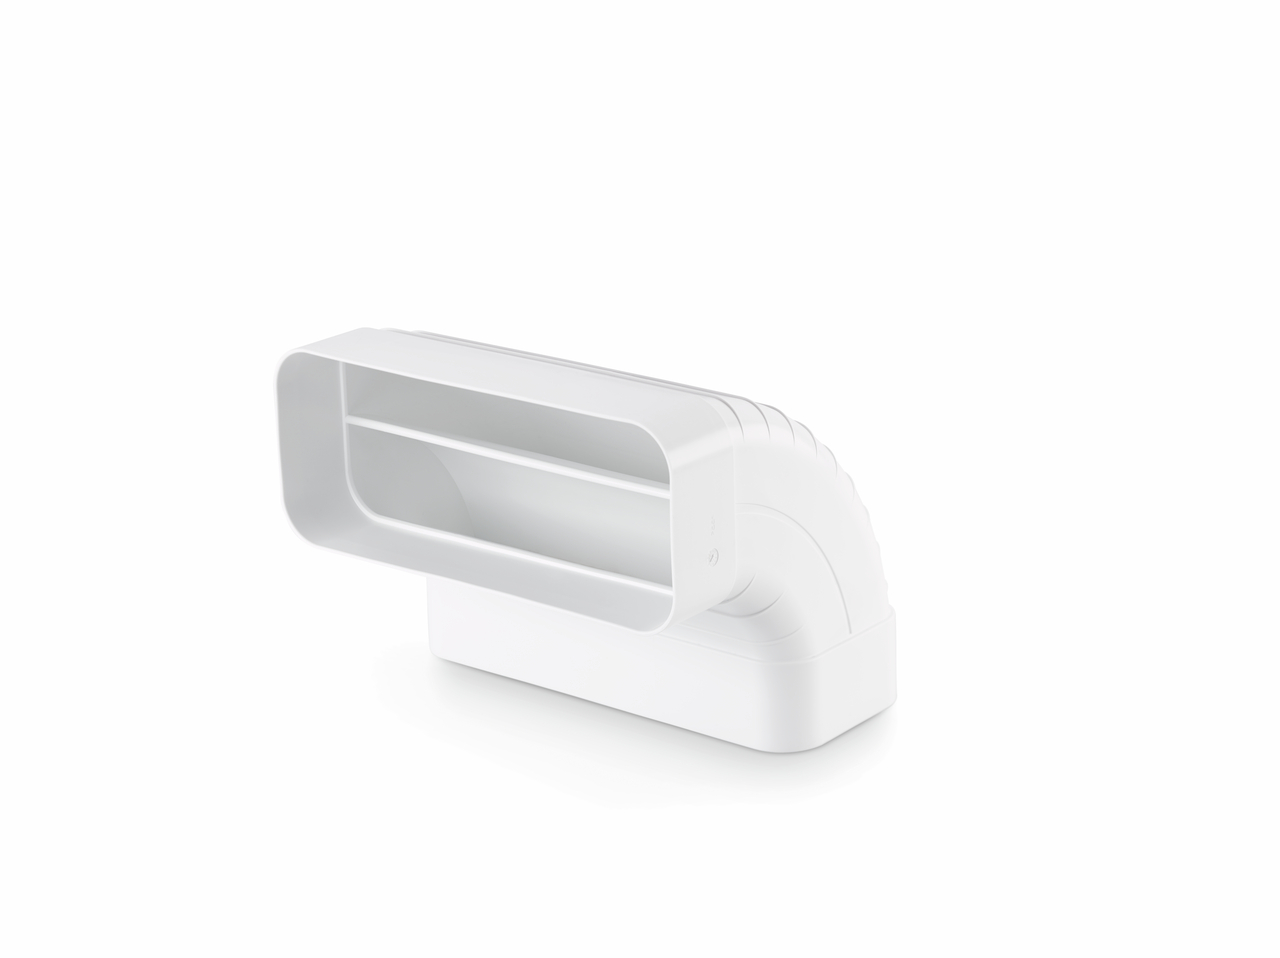  F-RBV 150 pipe bend vertical 90°, white